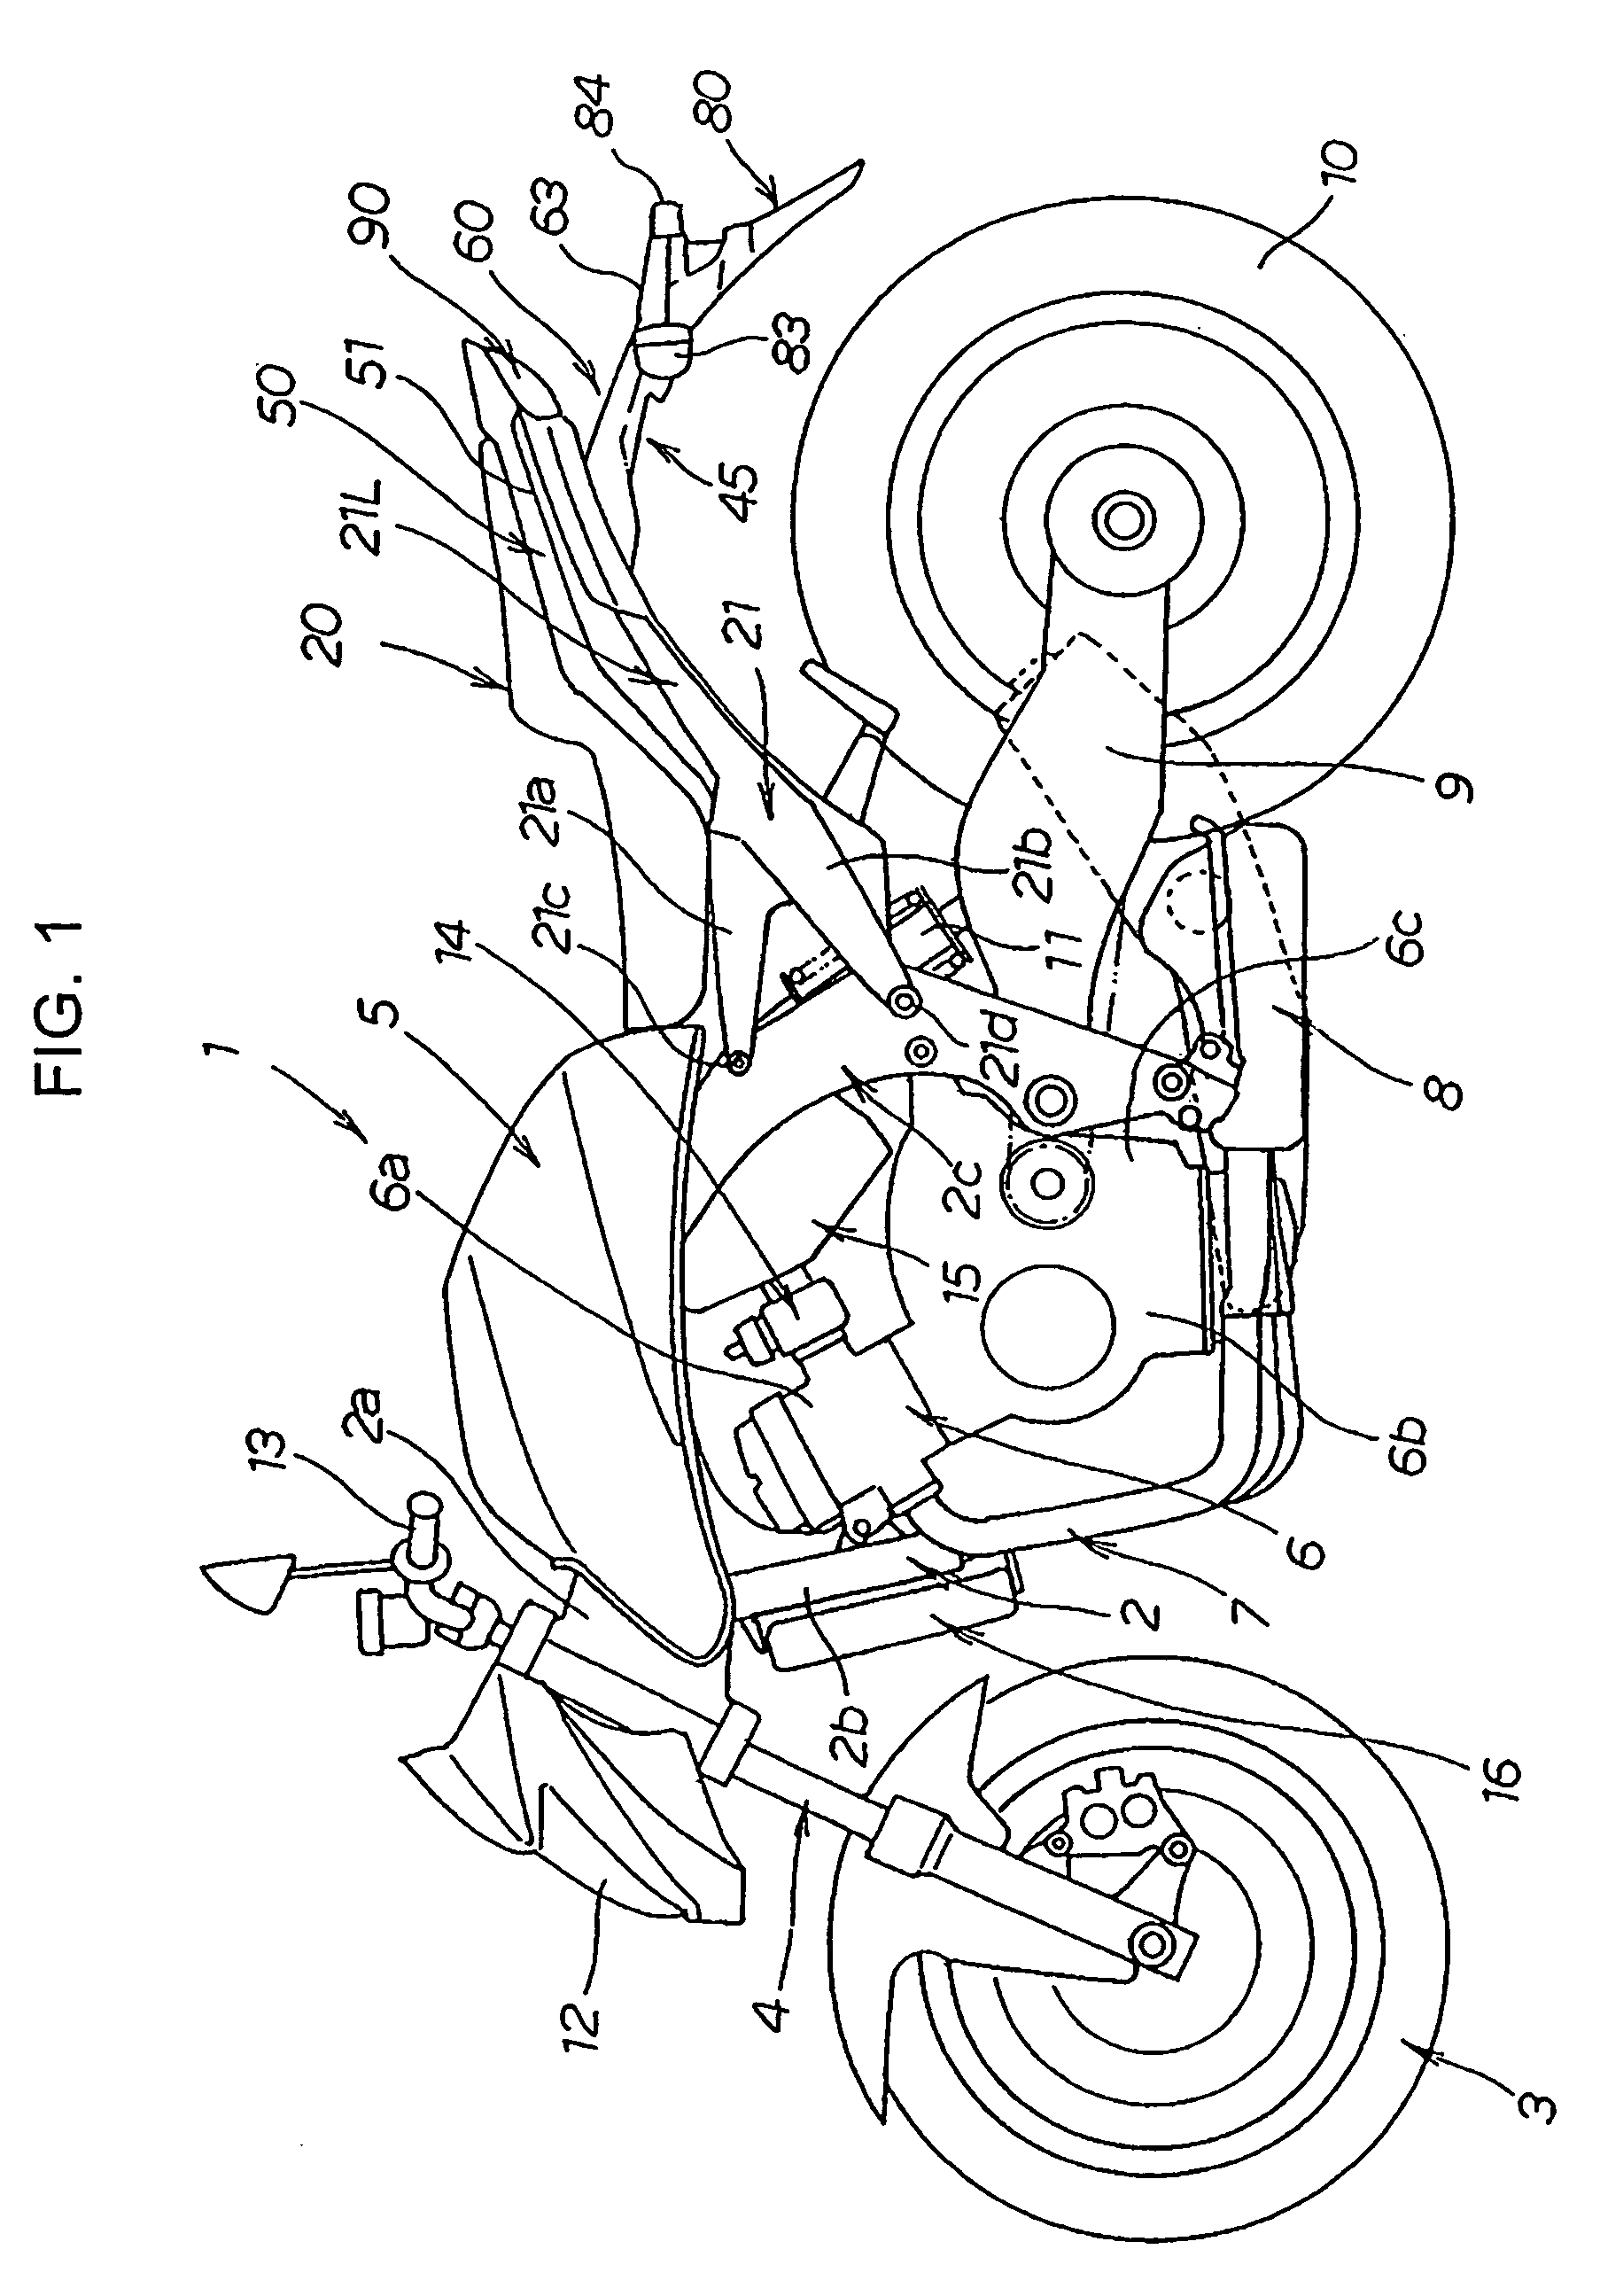 Seat mounting structure for motorcycle, and motorcycle incorporating same